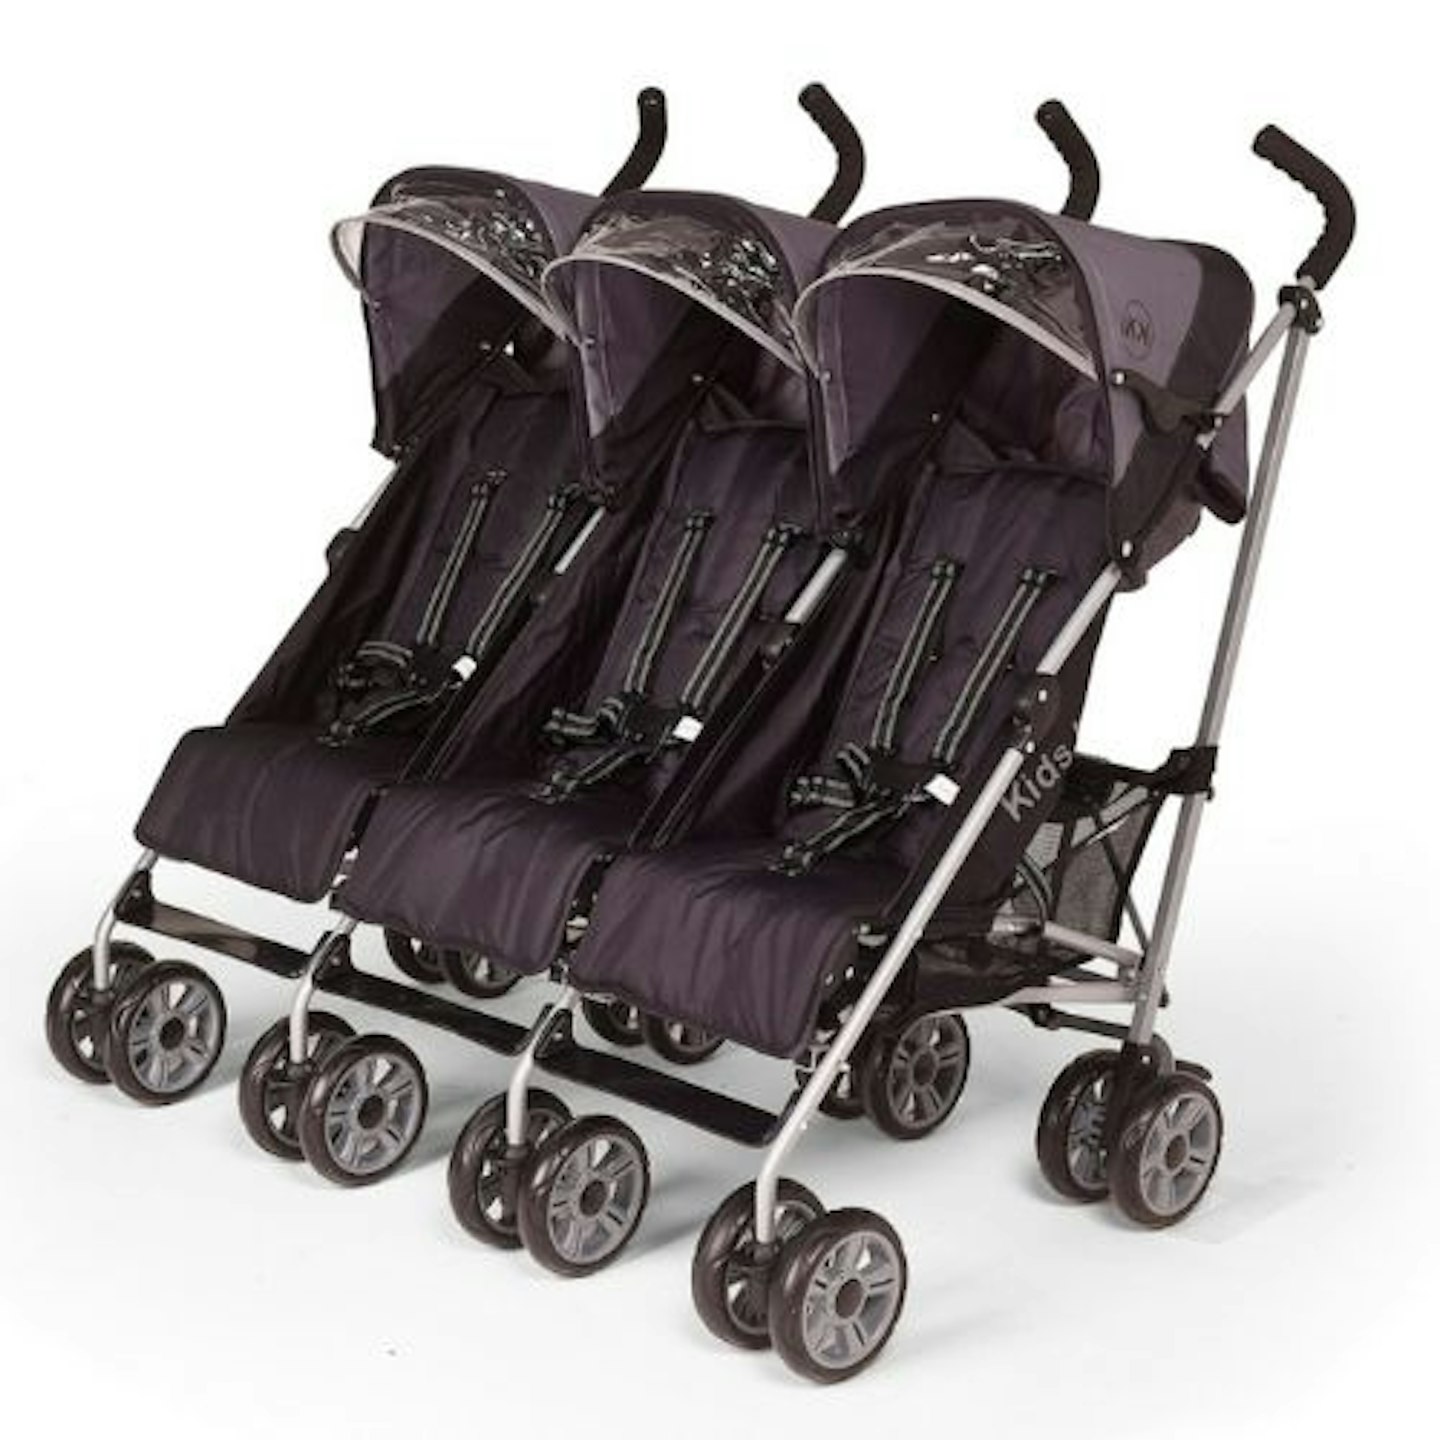 Kids Kargo Triple Pushchair With Raincover & Safety Strap Reflector Strips